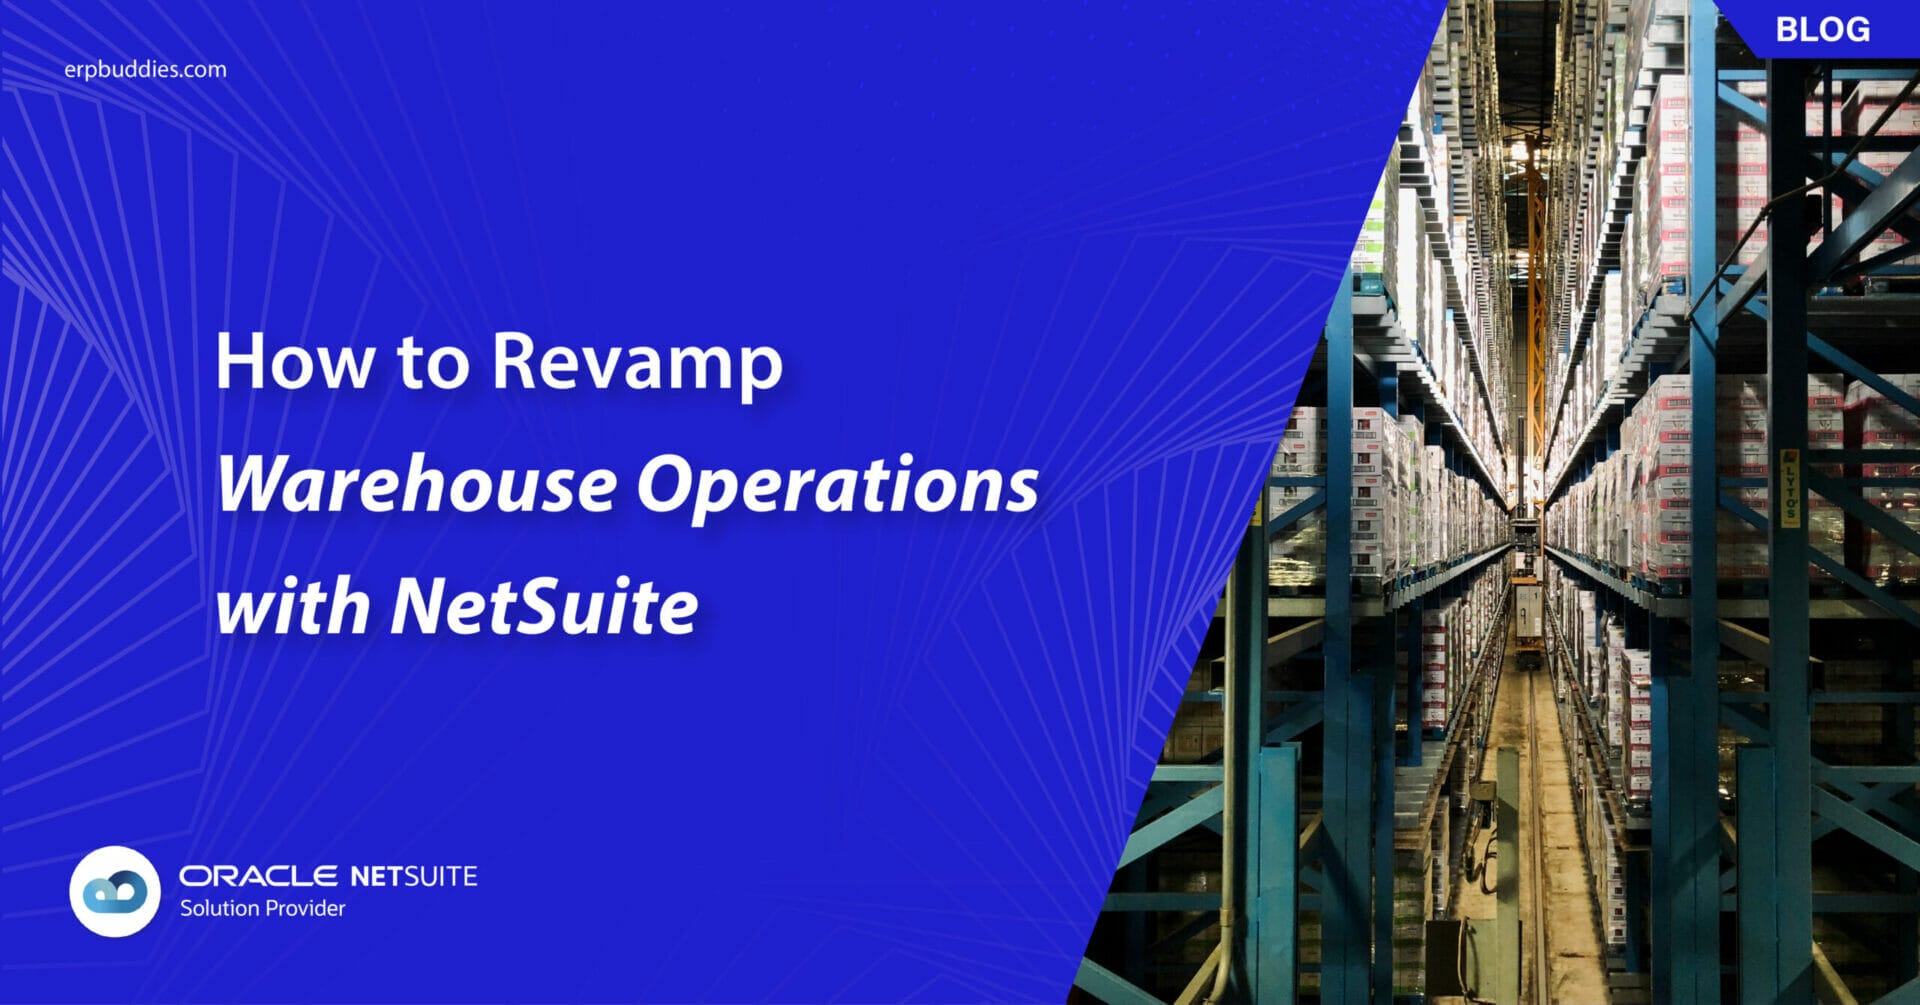 How to Revamp Warehouse Operations with NetSuite